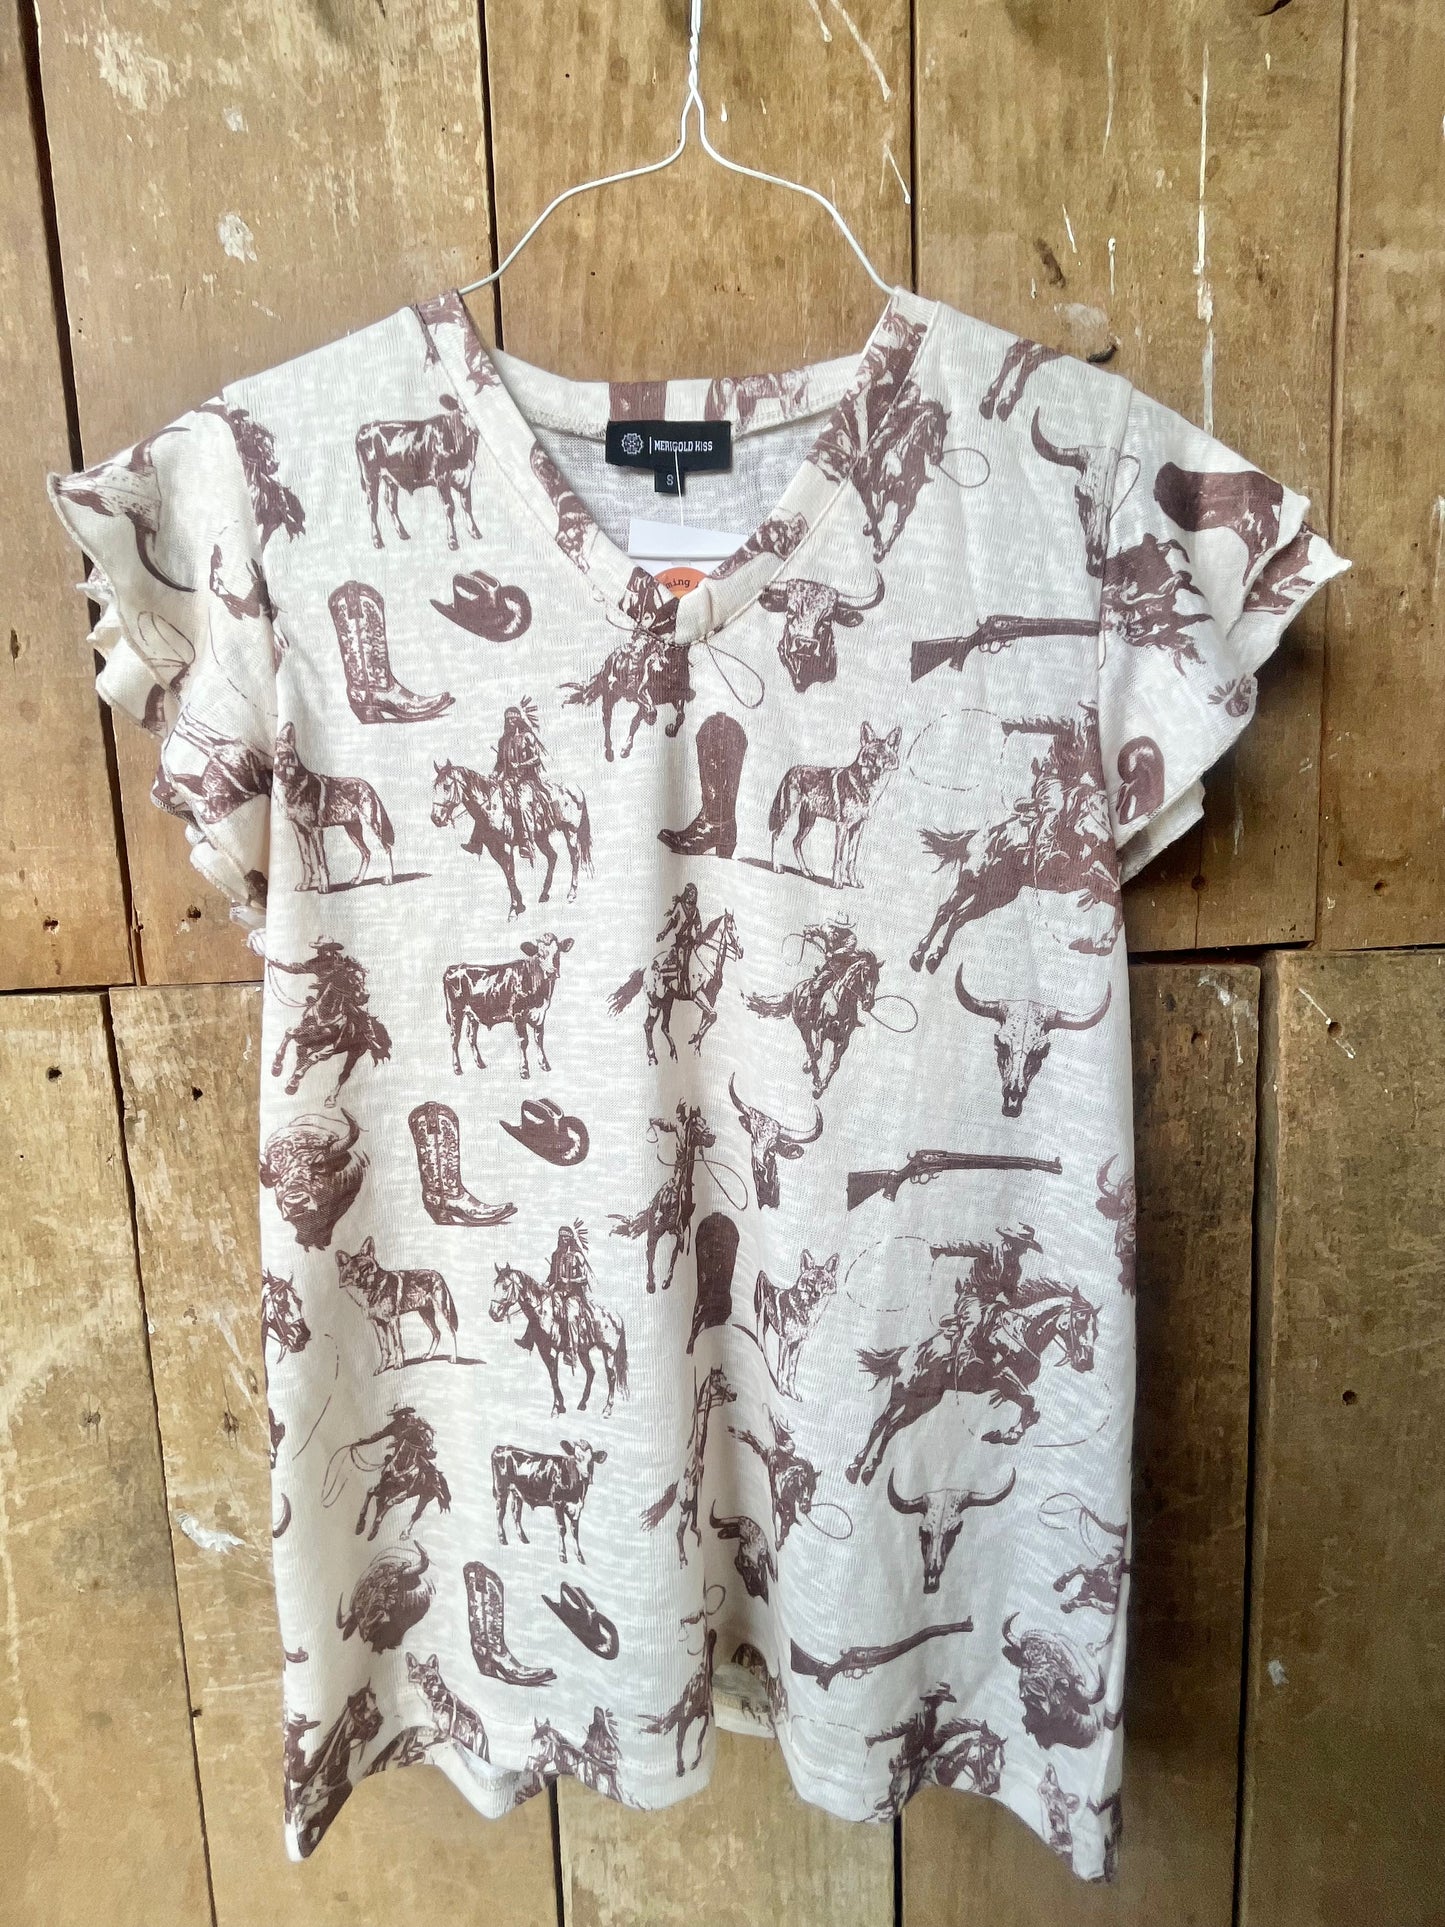 The Cowboys and Indians Top